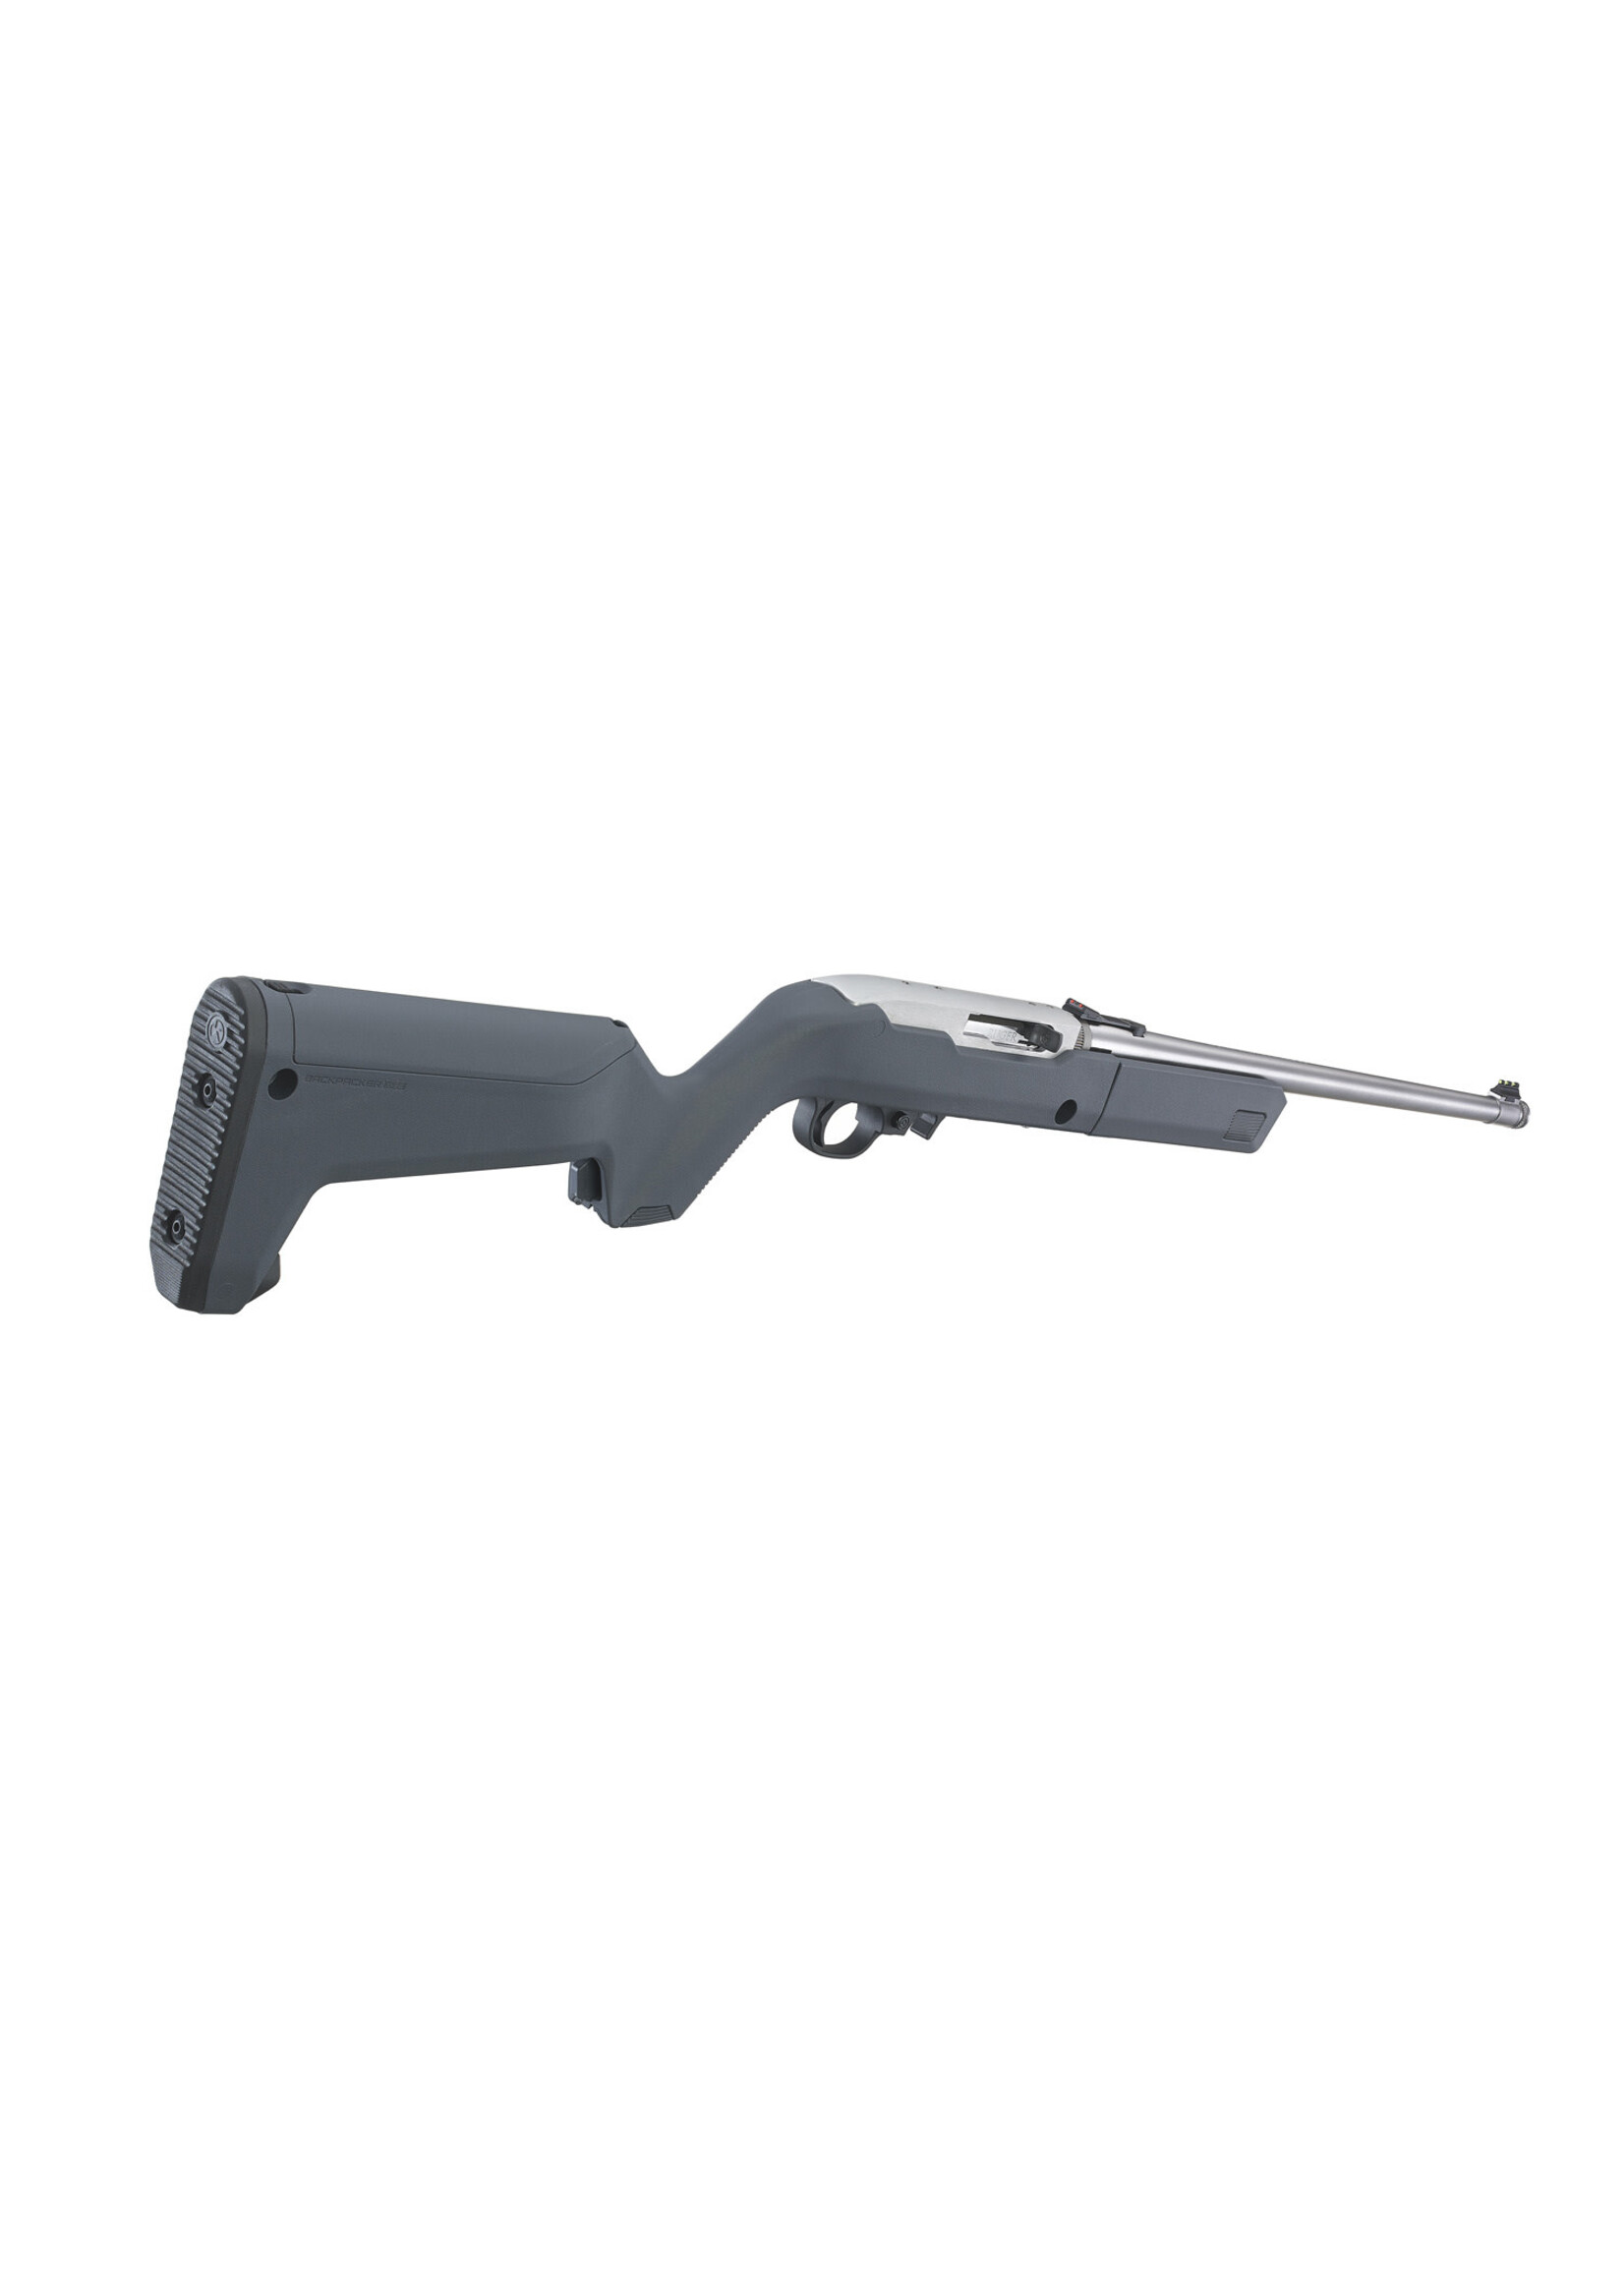 RUGER RUGER 10/22 TAKEDOWN .22LR 10RD 16.4" W/ GRAY MAGPUL X-22 BACKPACKER STOCK